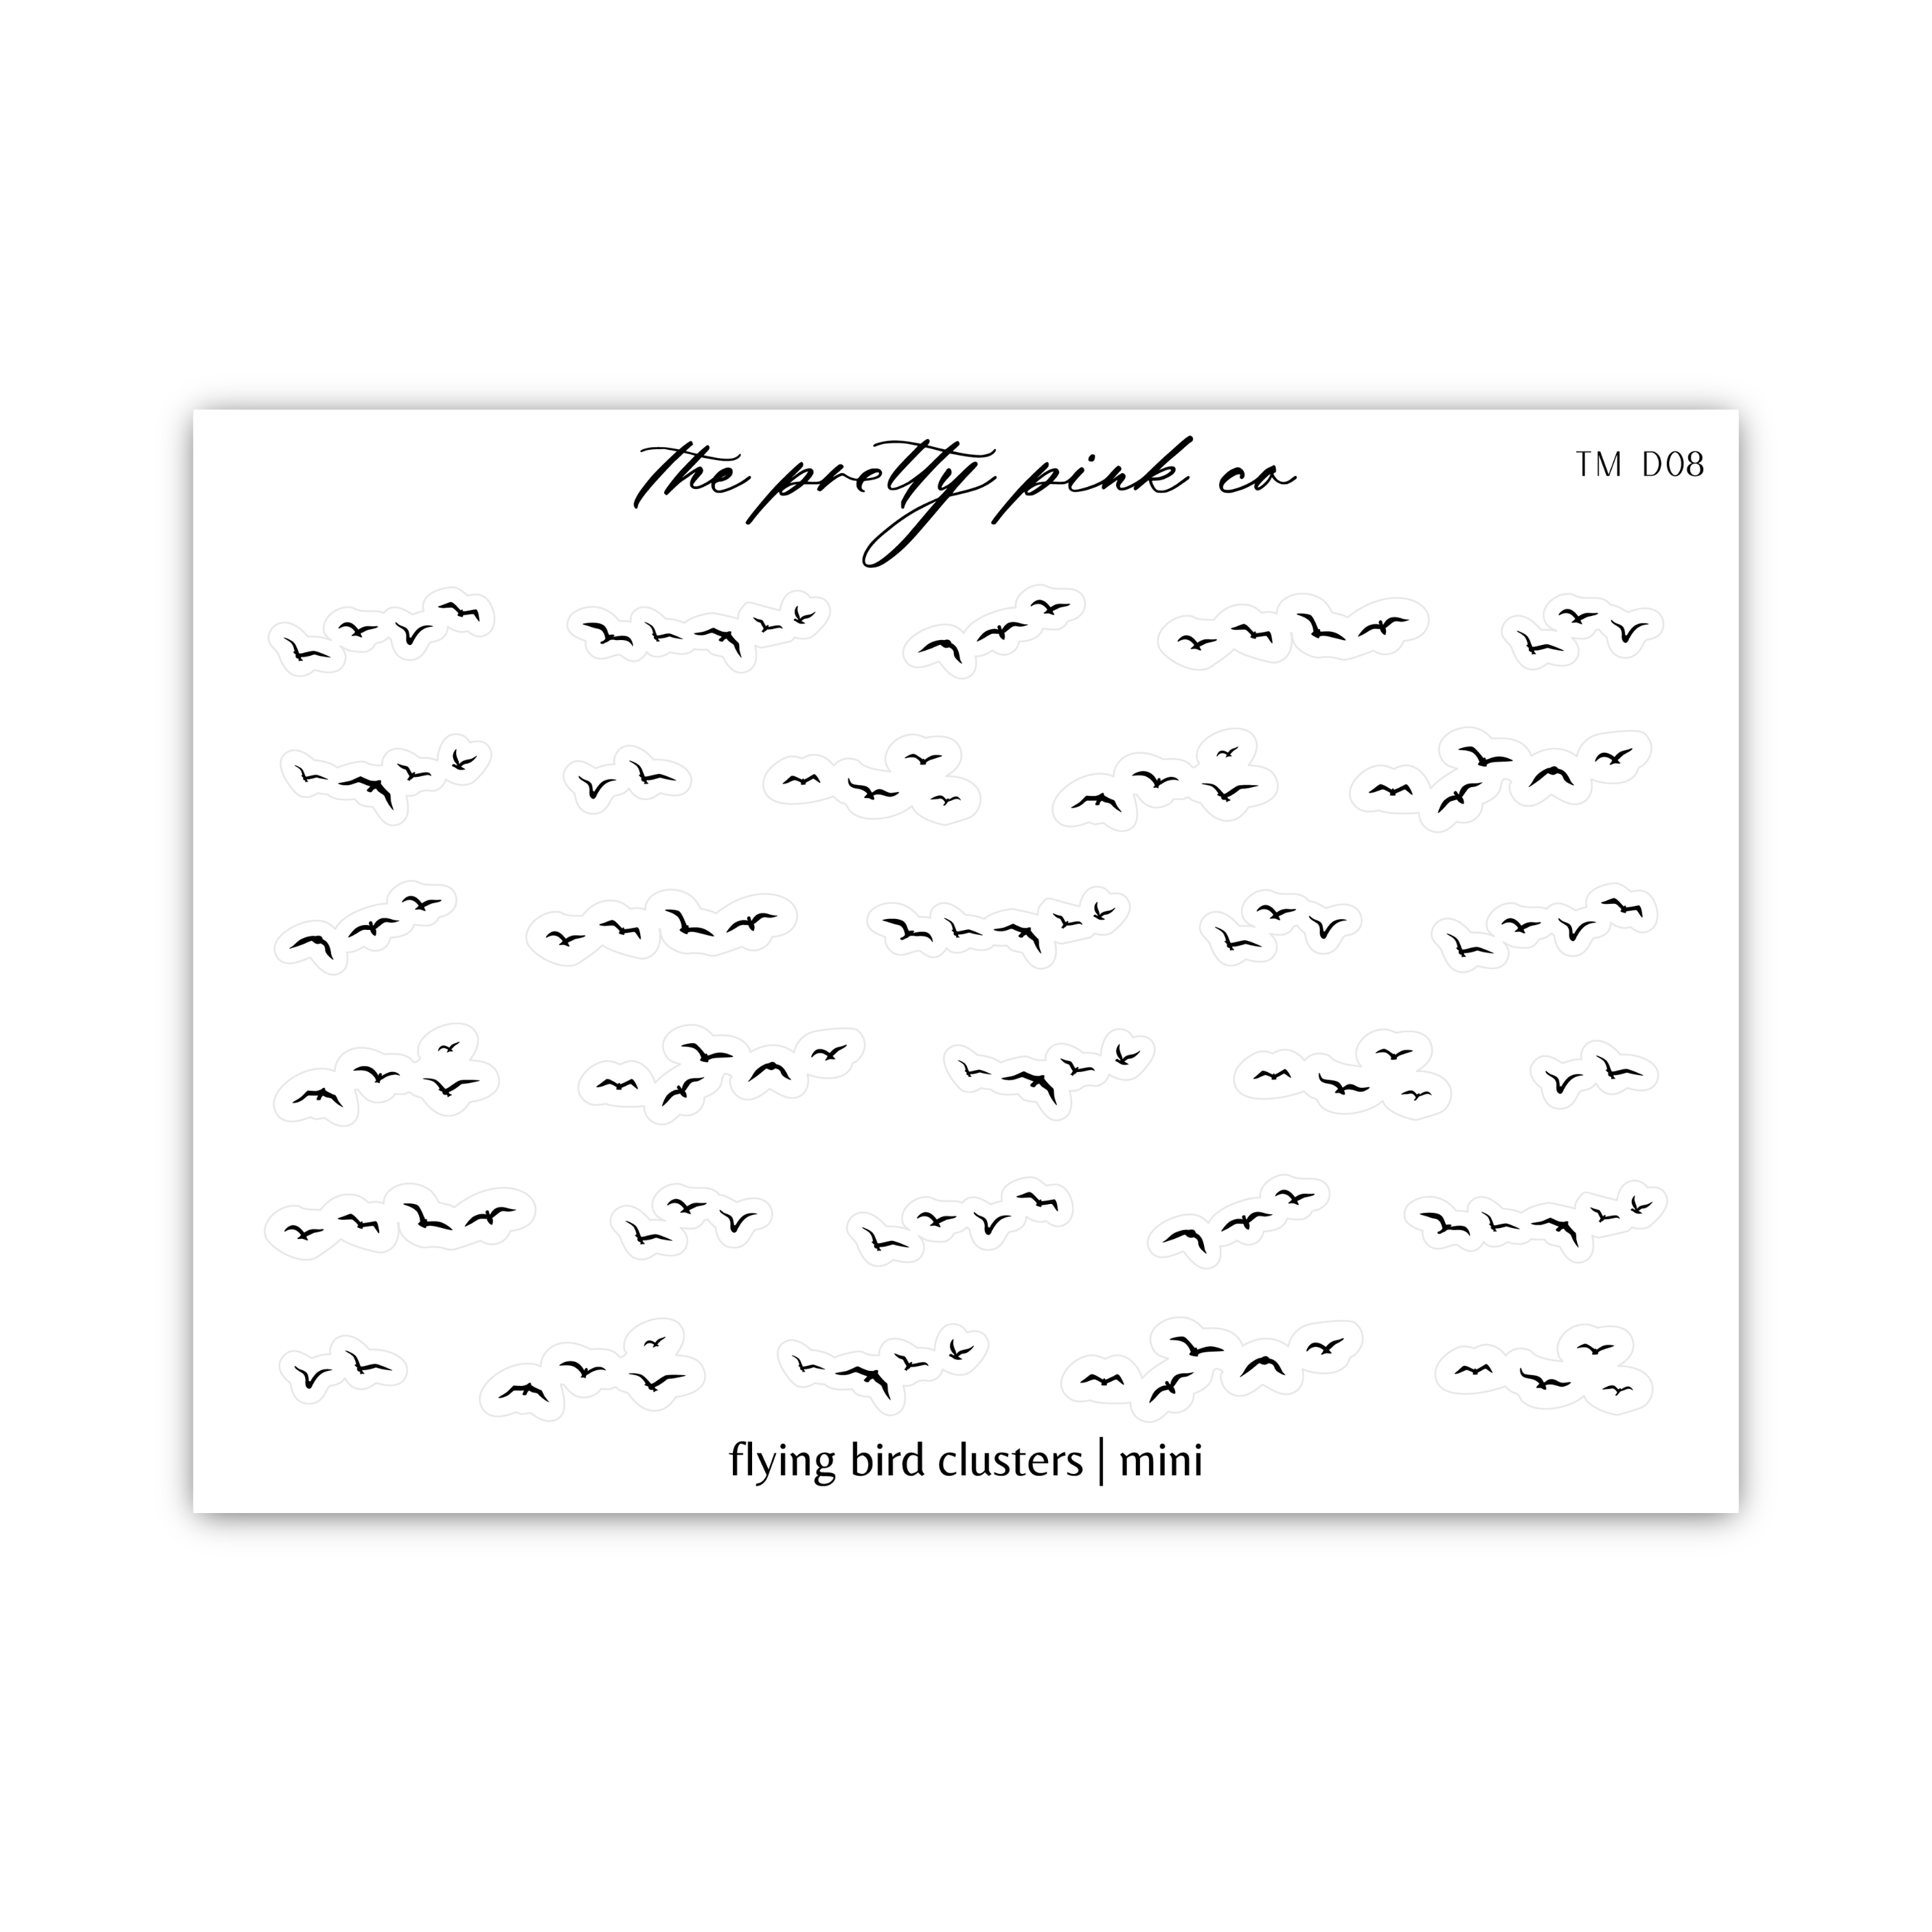 a postcard with a flock of birds flying in the sky